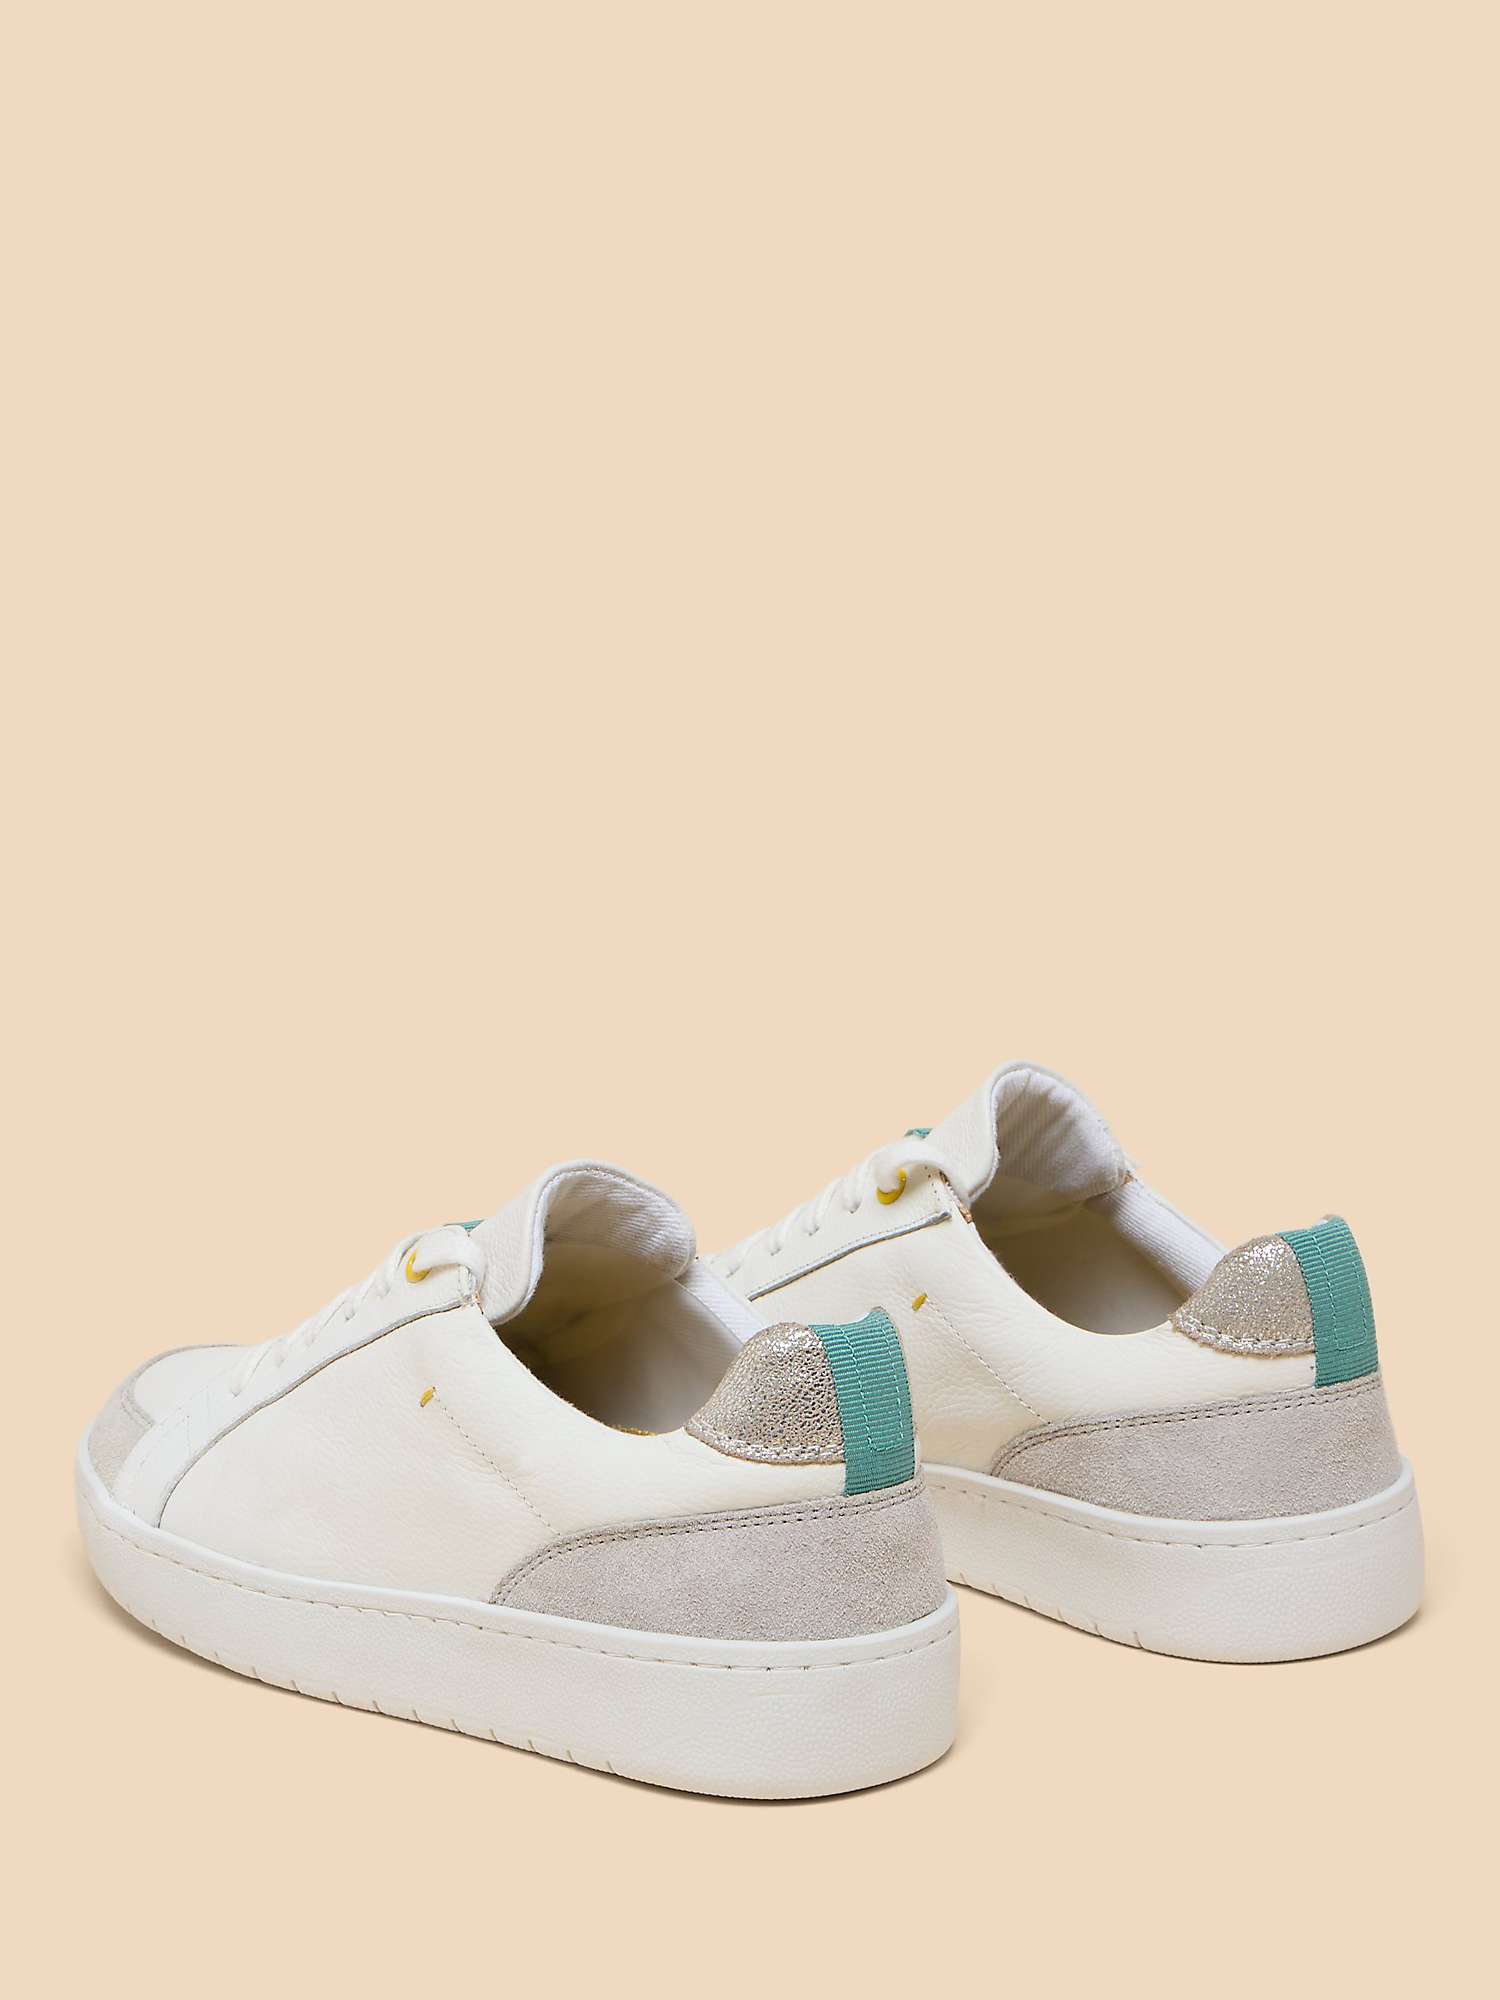 Buy White Stuff Suede Trainers, White/Multi Online at johnlewis.com